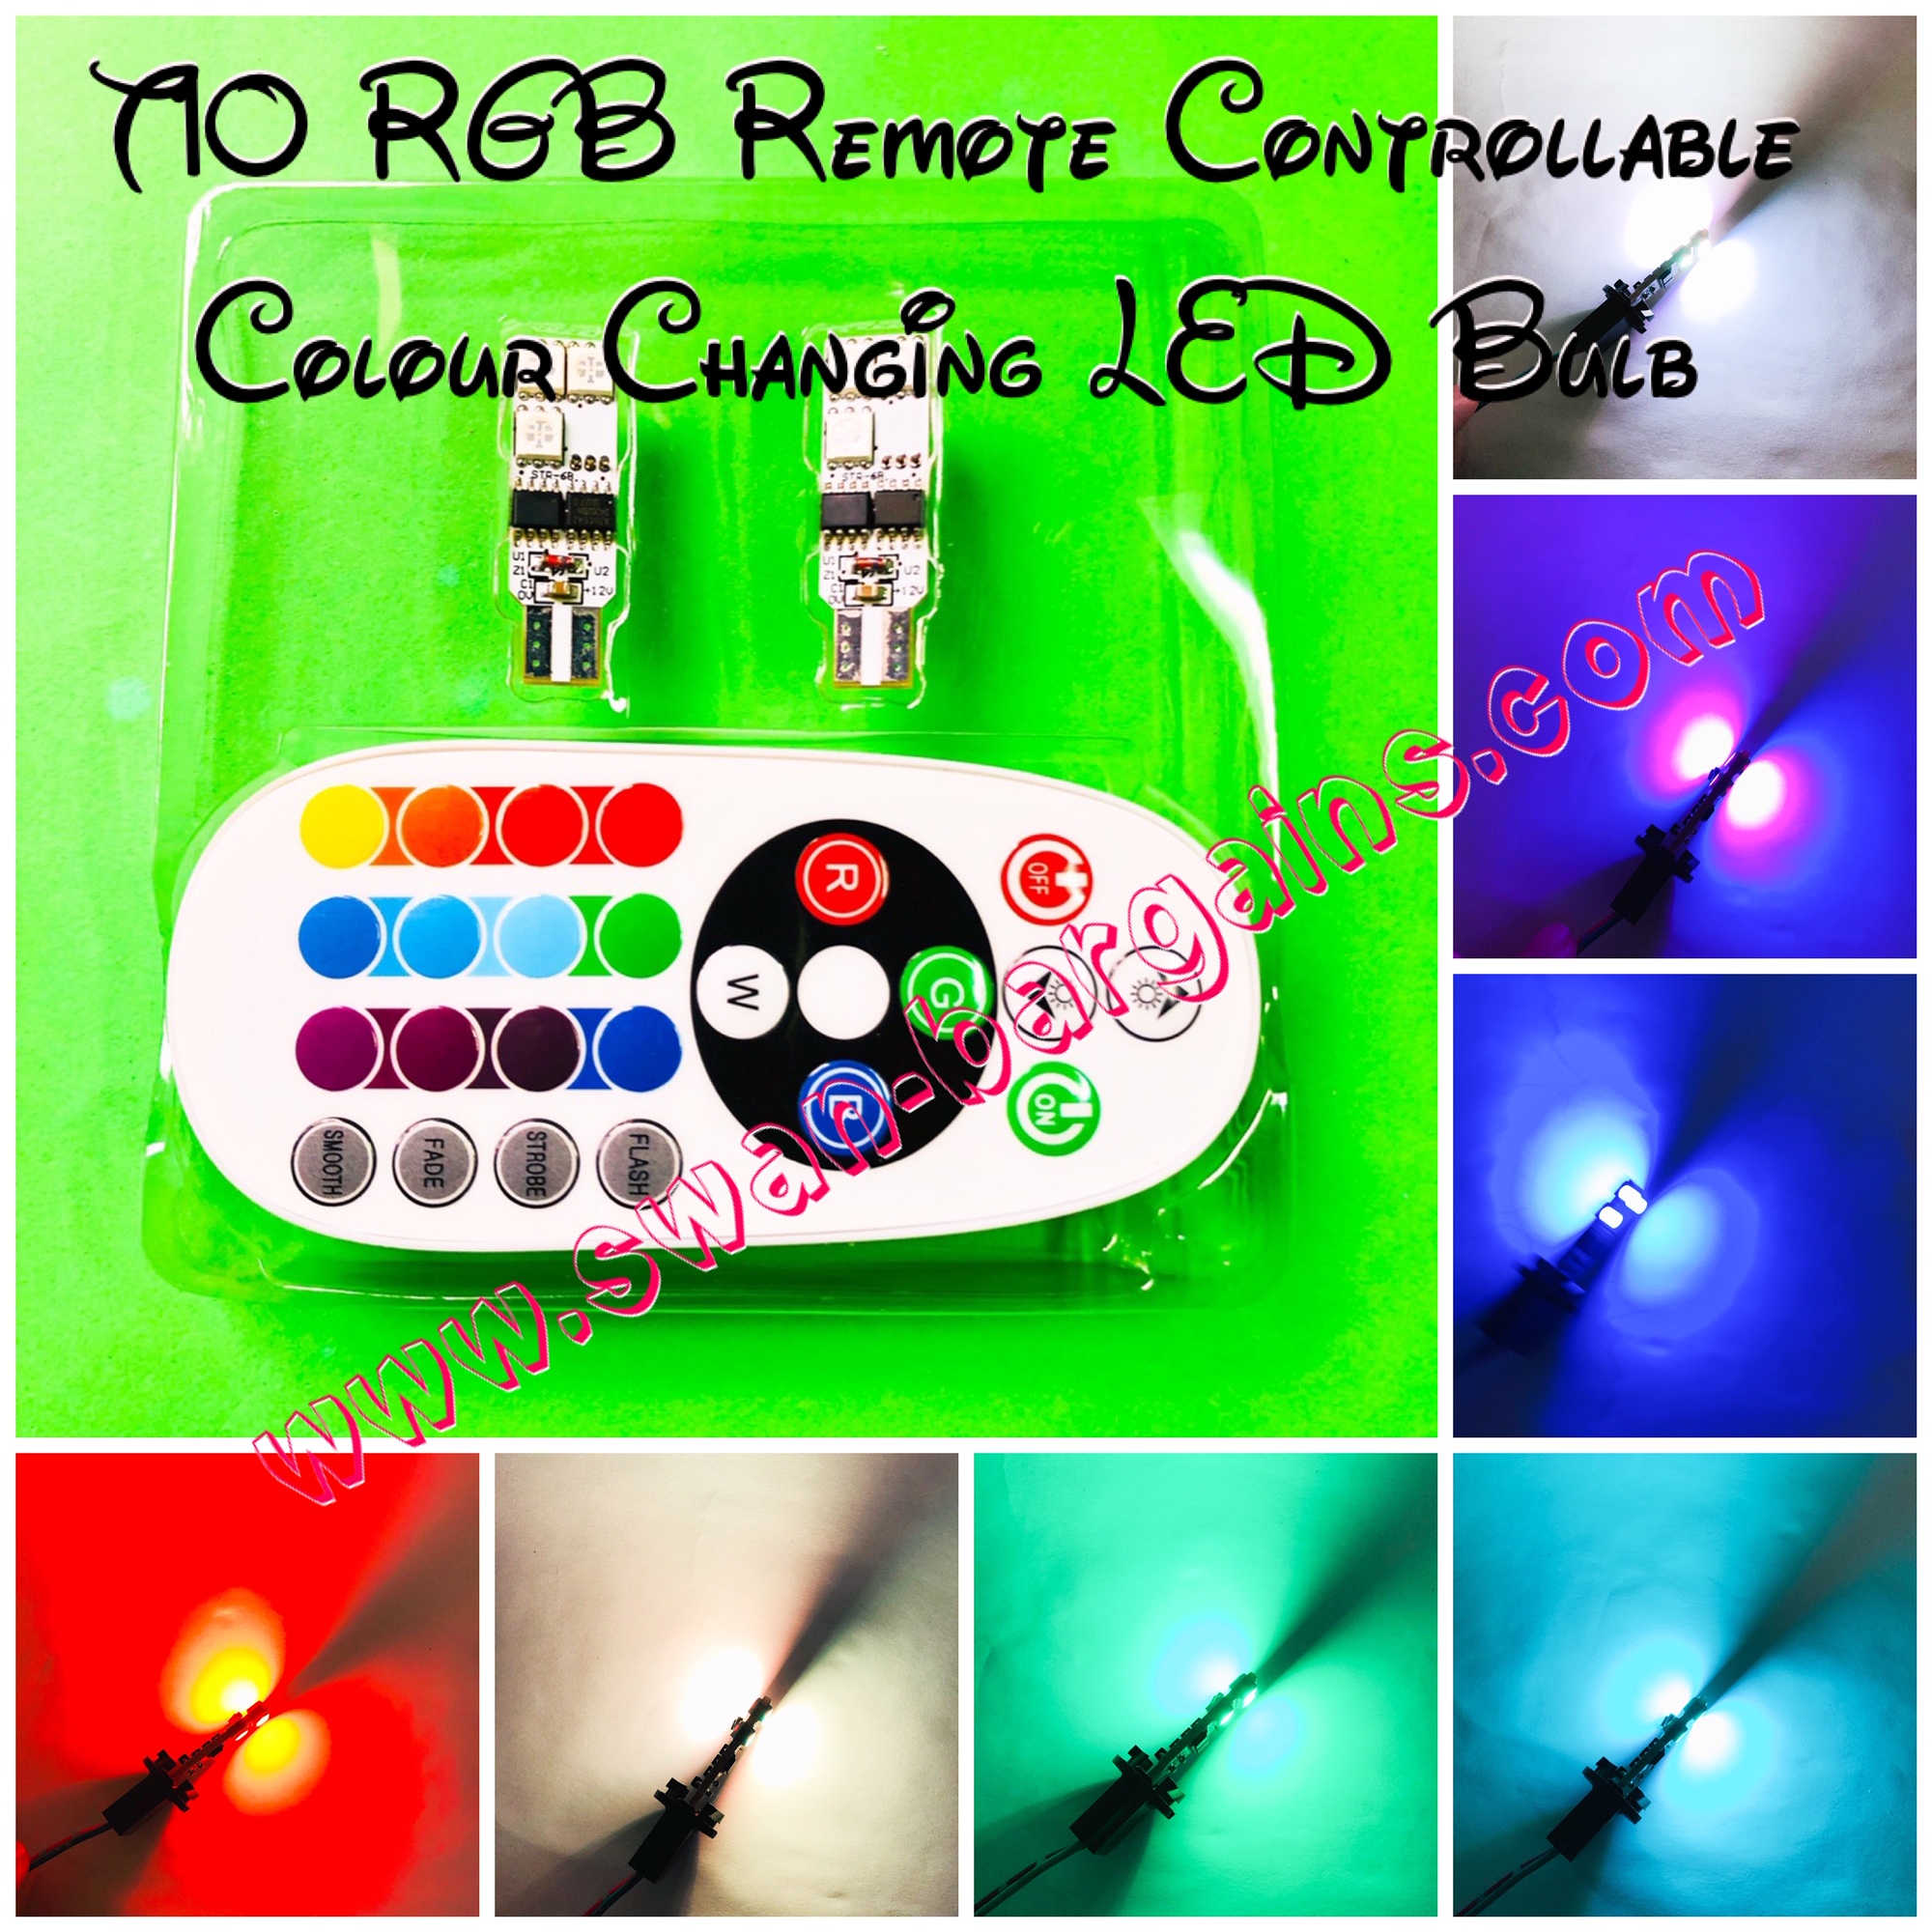 T10 T15 Colour Changing Remote Control RGB LED Bulb Singapore - 6SMD